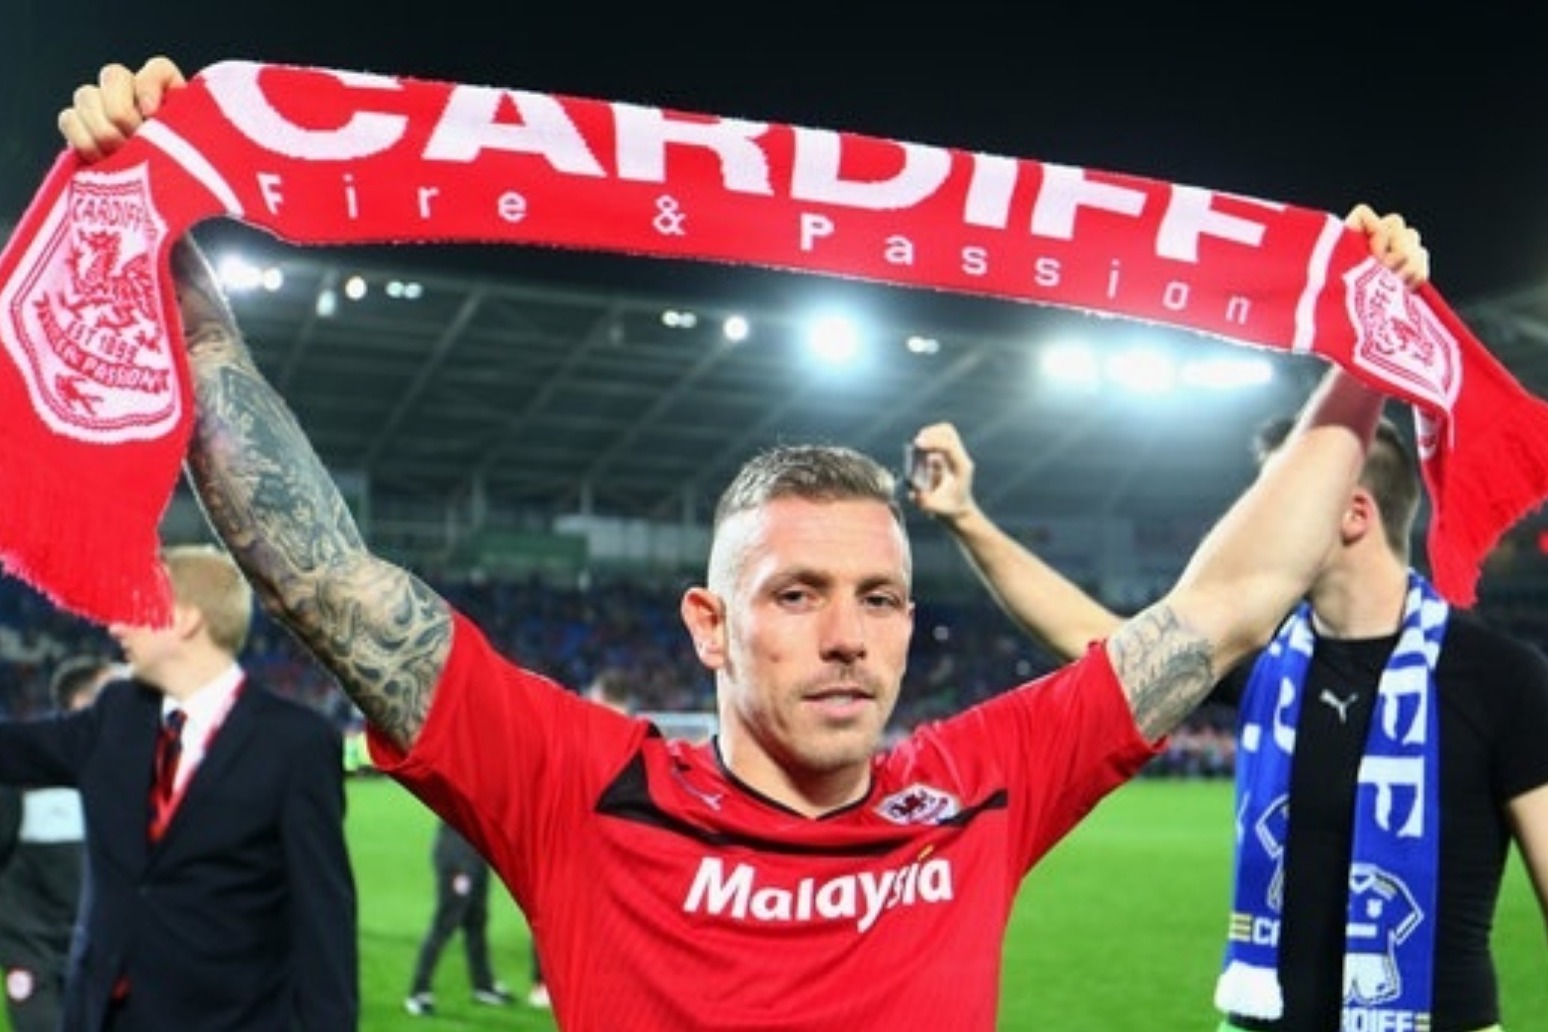 Cardiff youth coach Bellamy steps down over bullying claims 